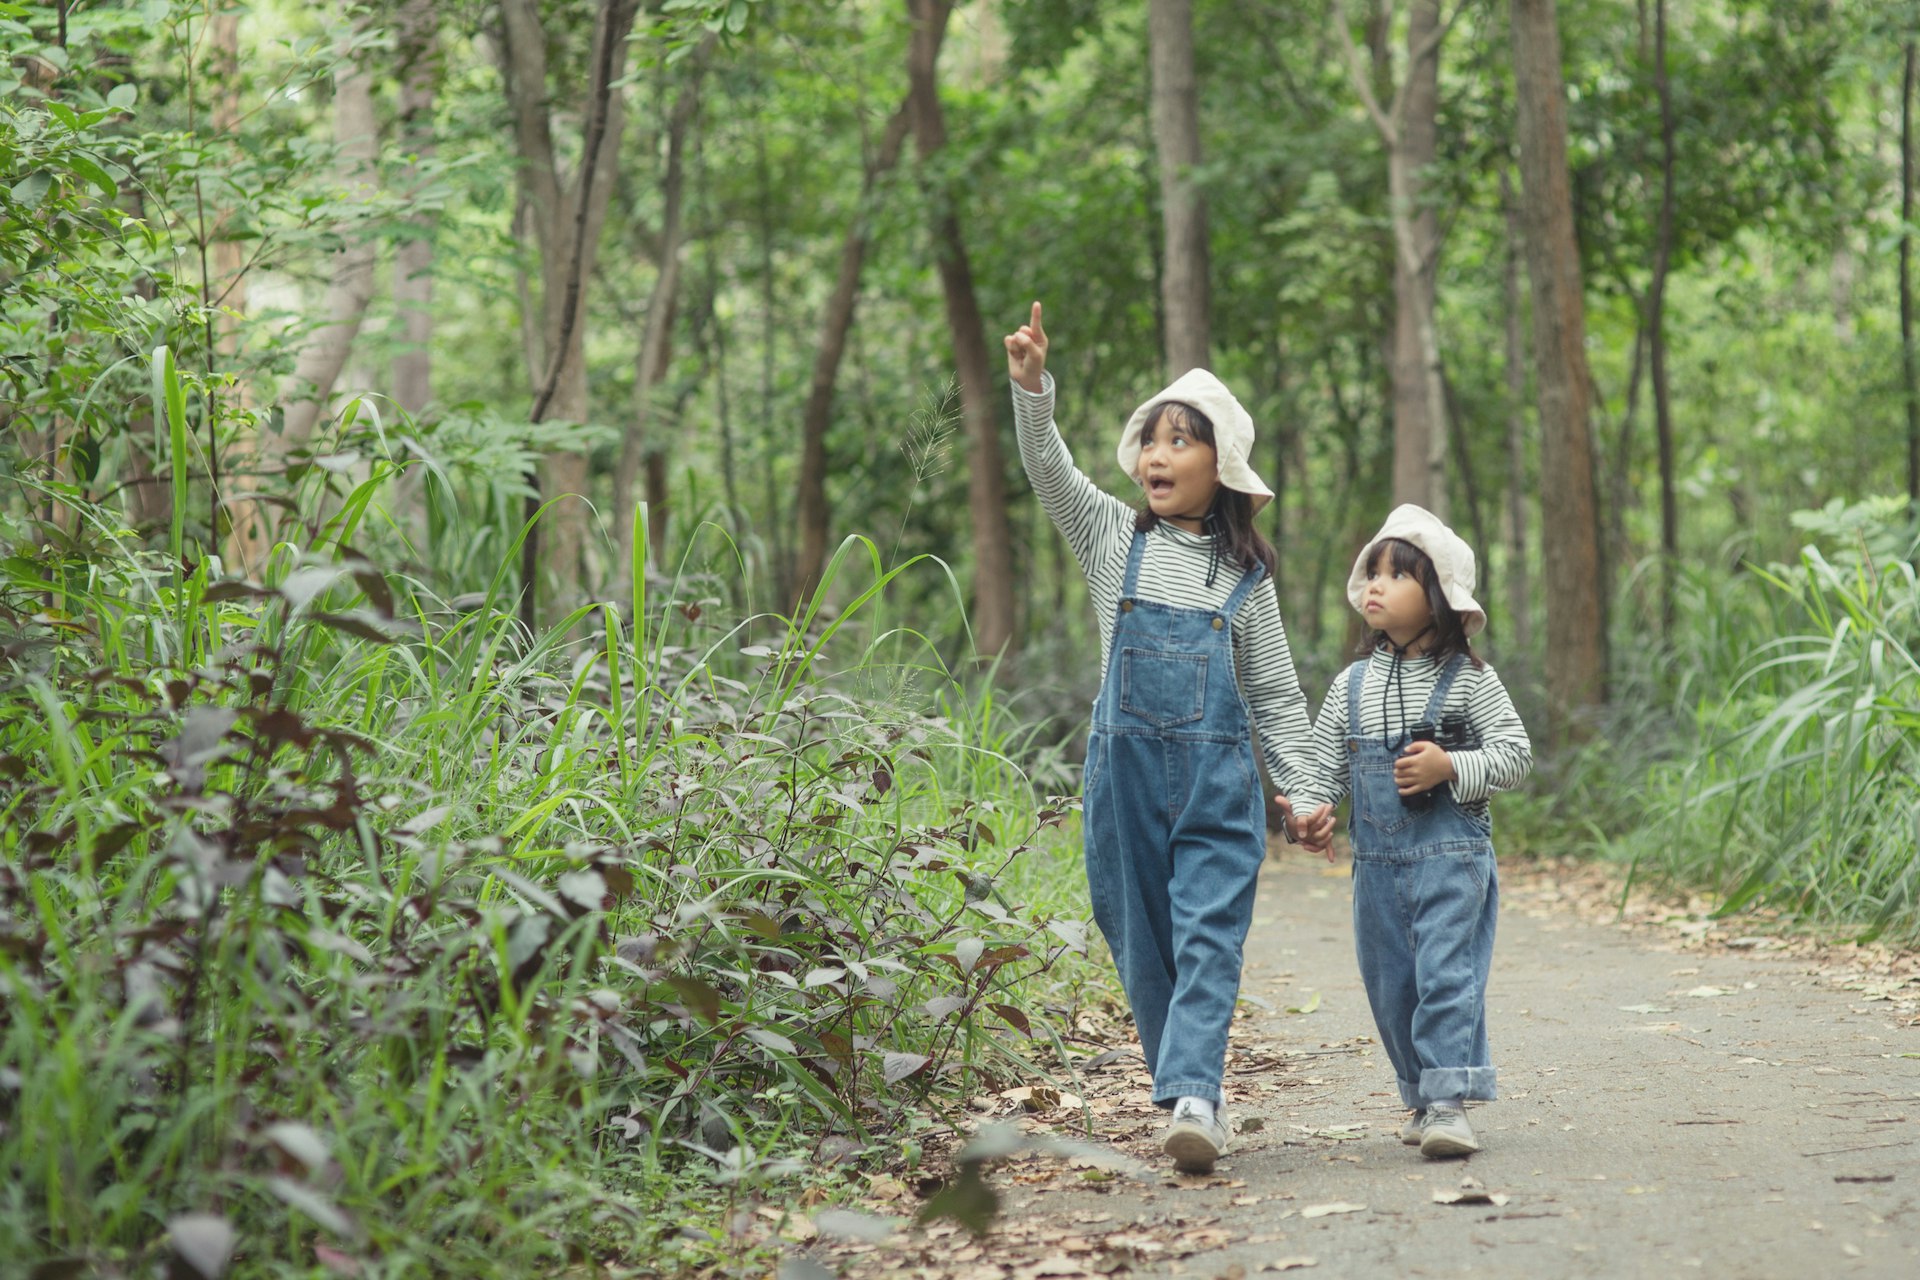 Children are heading to the family campsite in the forest Walk along the tourist route.